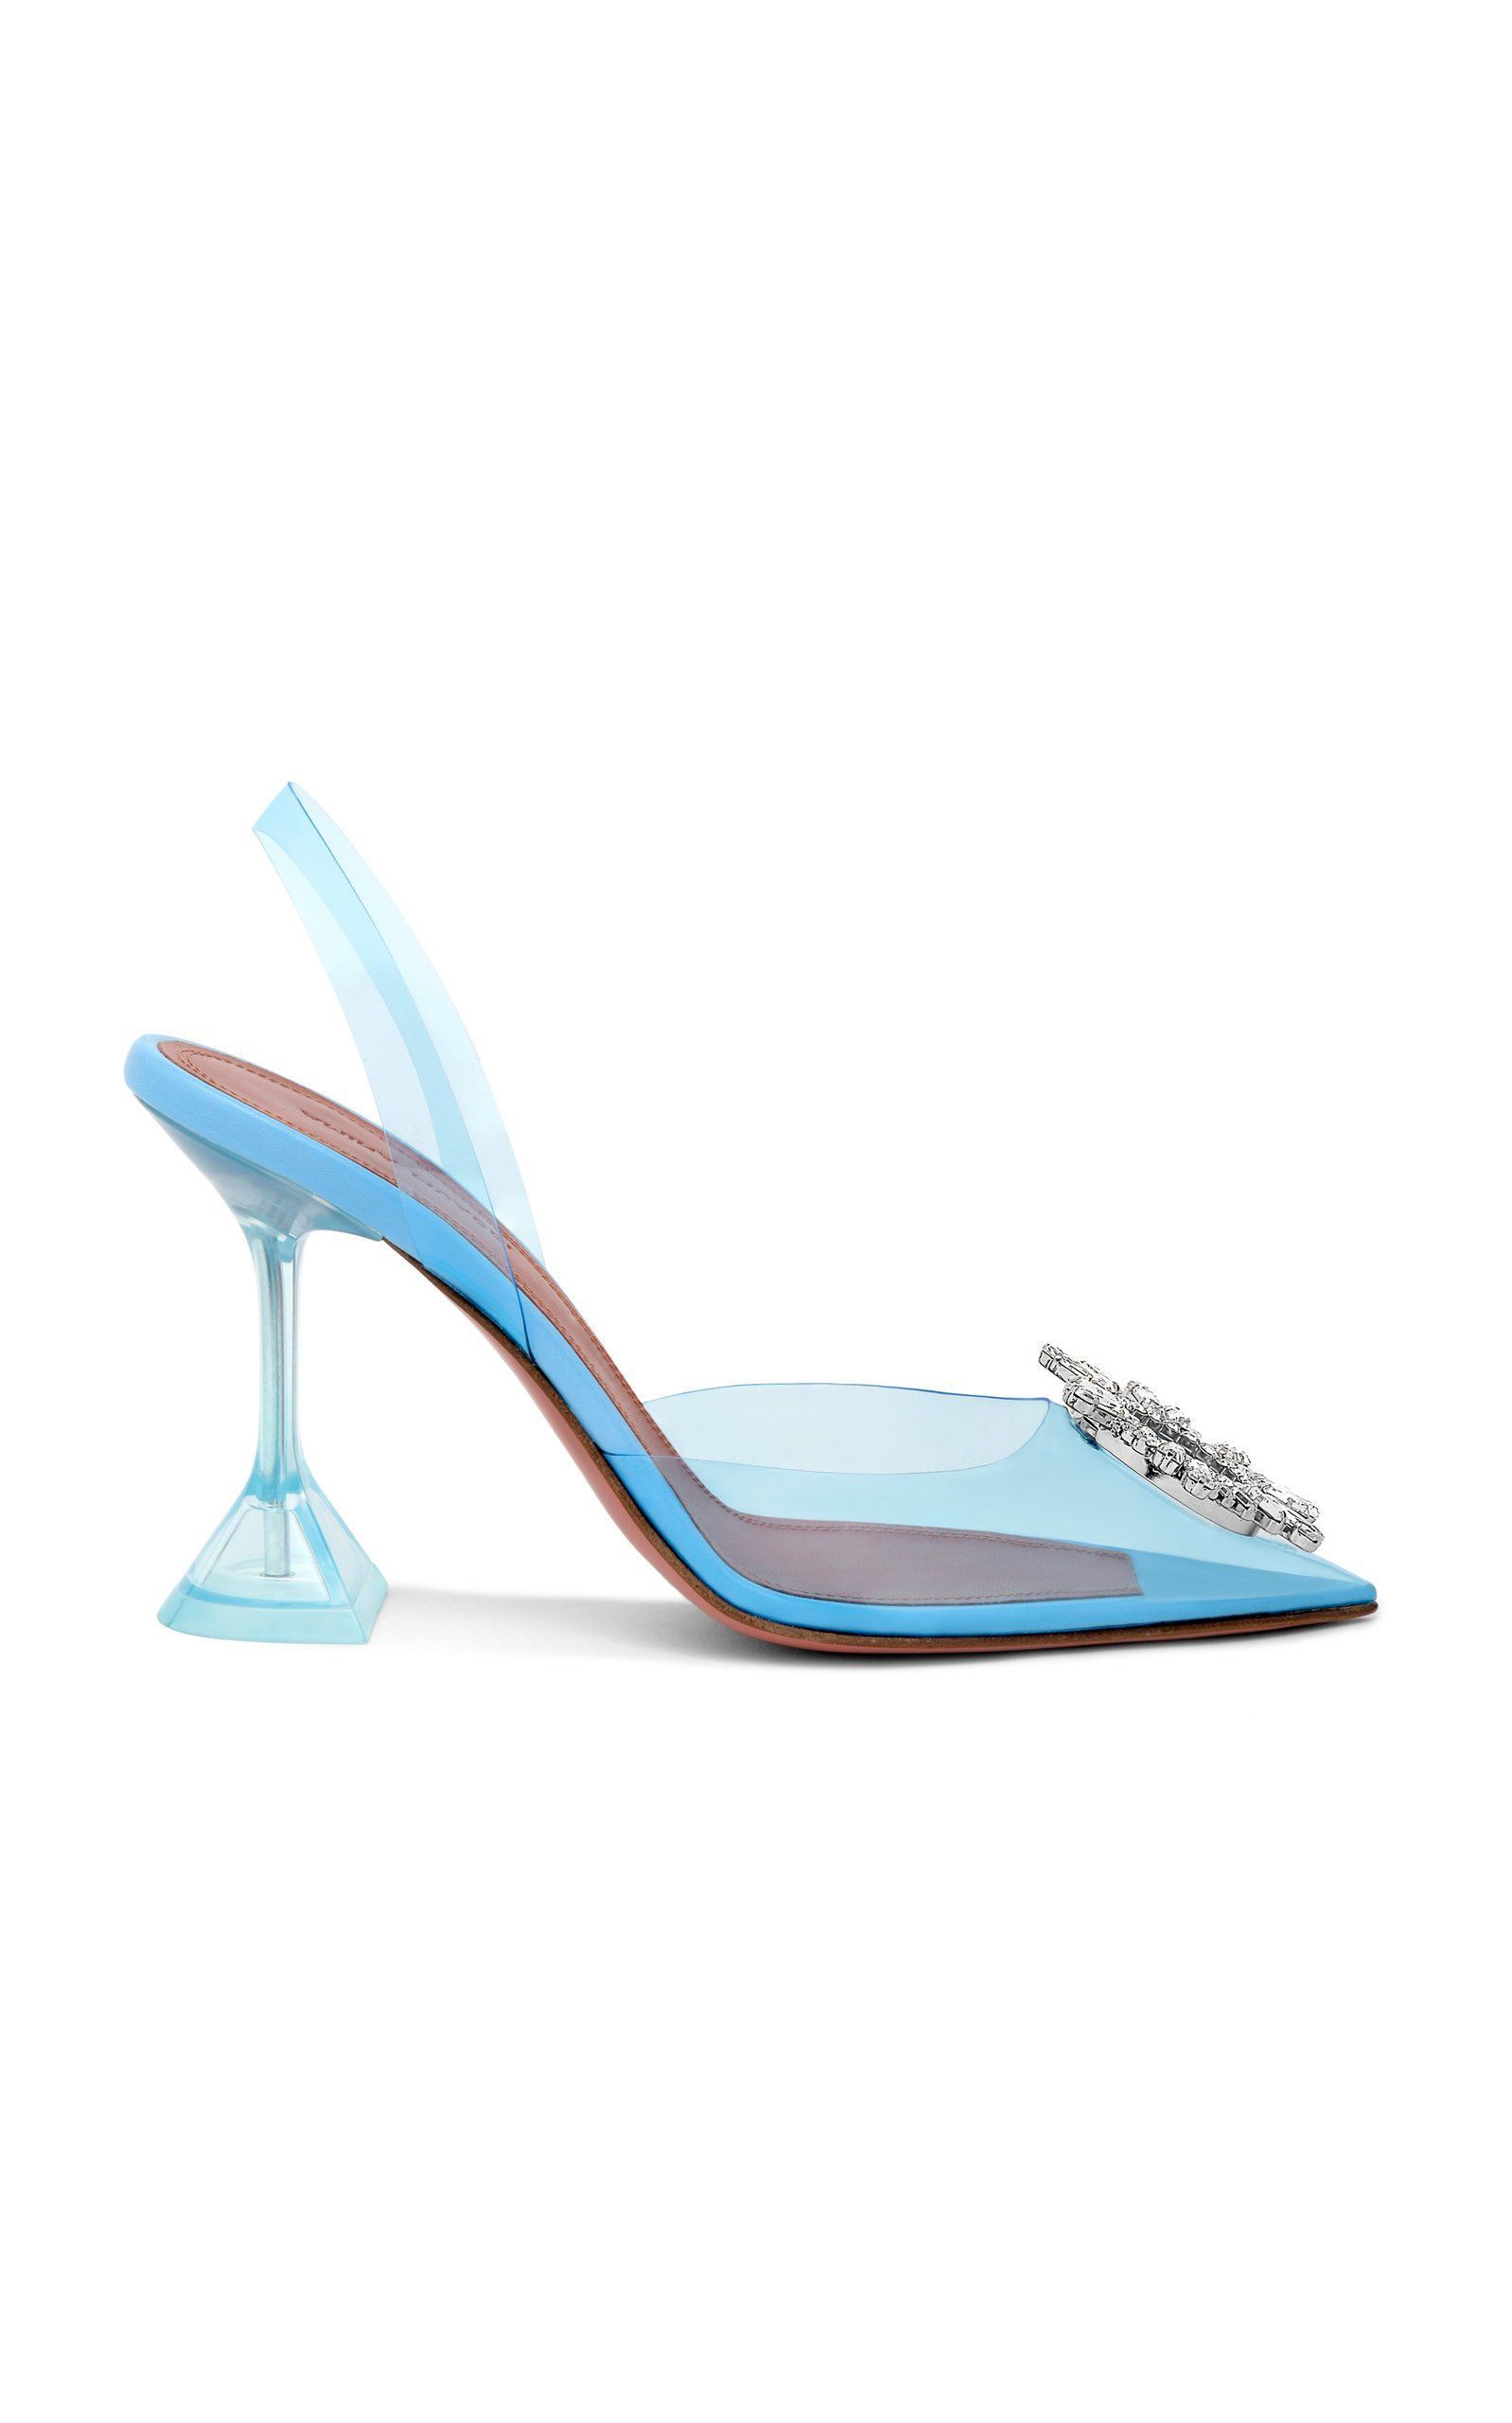 35 Blue Wedding Shoes - The Best Blue Shoes For Your Wedding